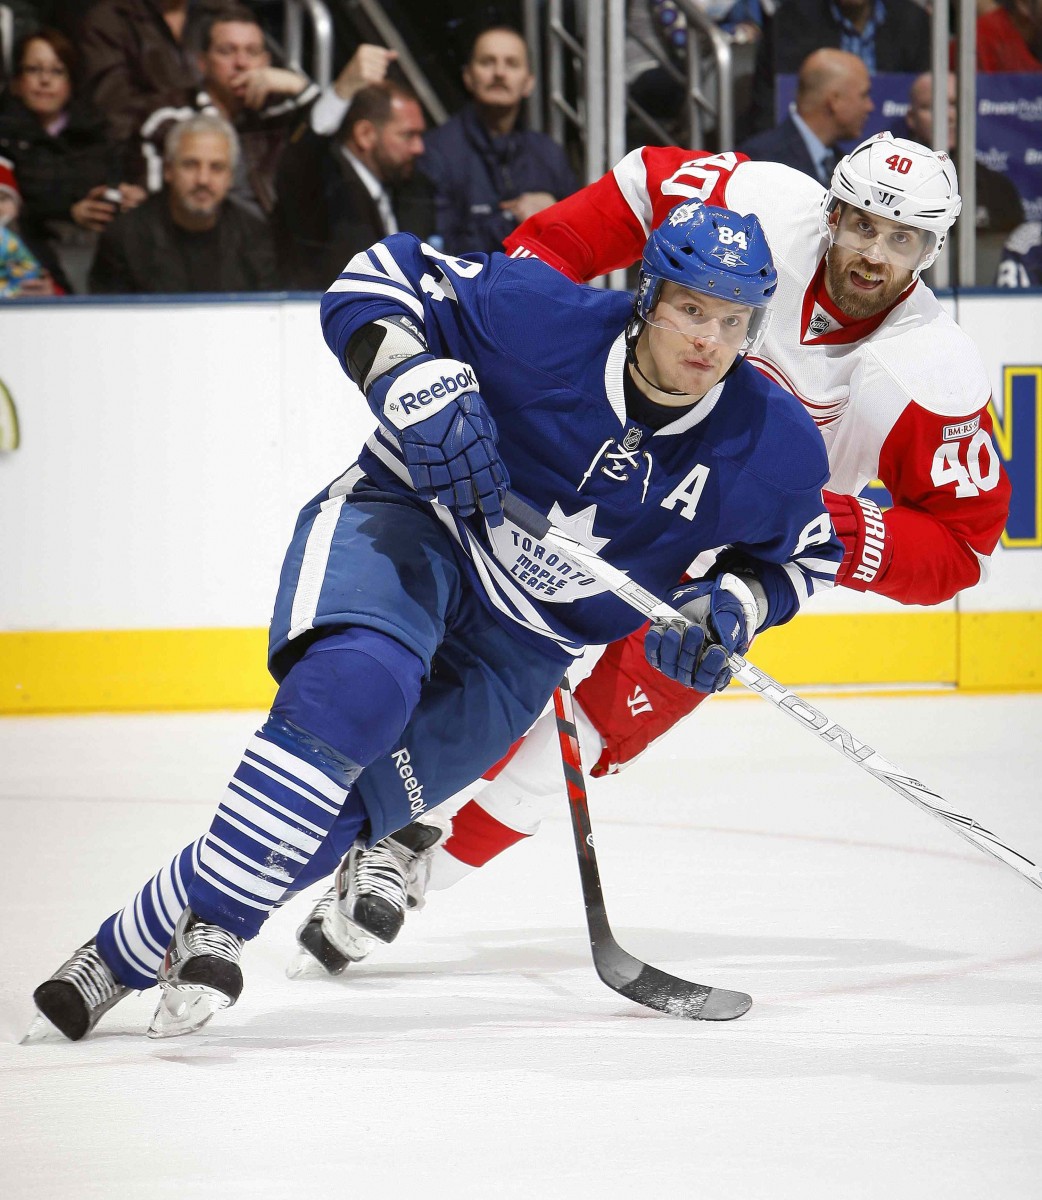 Mikhail Grabovski of the Toronto Maple Leafs is pursued by Henrik Zetterberg of the Detroit Red Wings in a game at the Air Canada Centre on Jan. 7, 2012. The new NHL realignment has Detroit and Toronto in the same division once again. (Abelimages/Getty Images) 